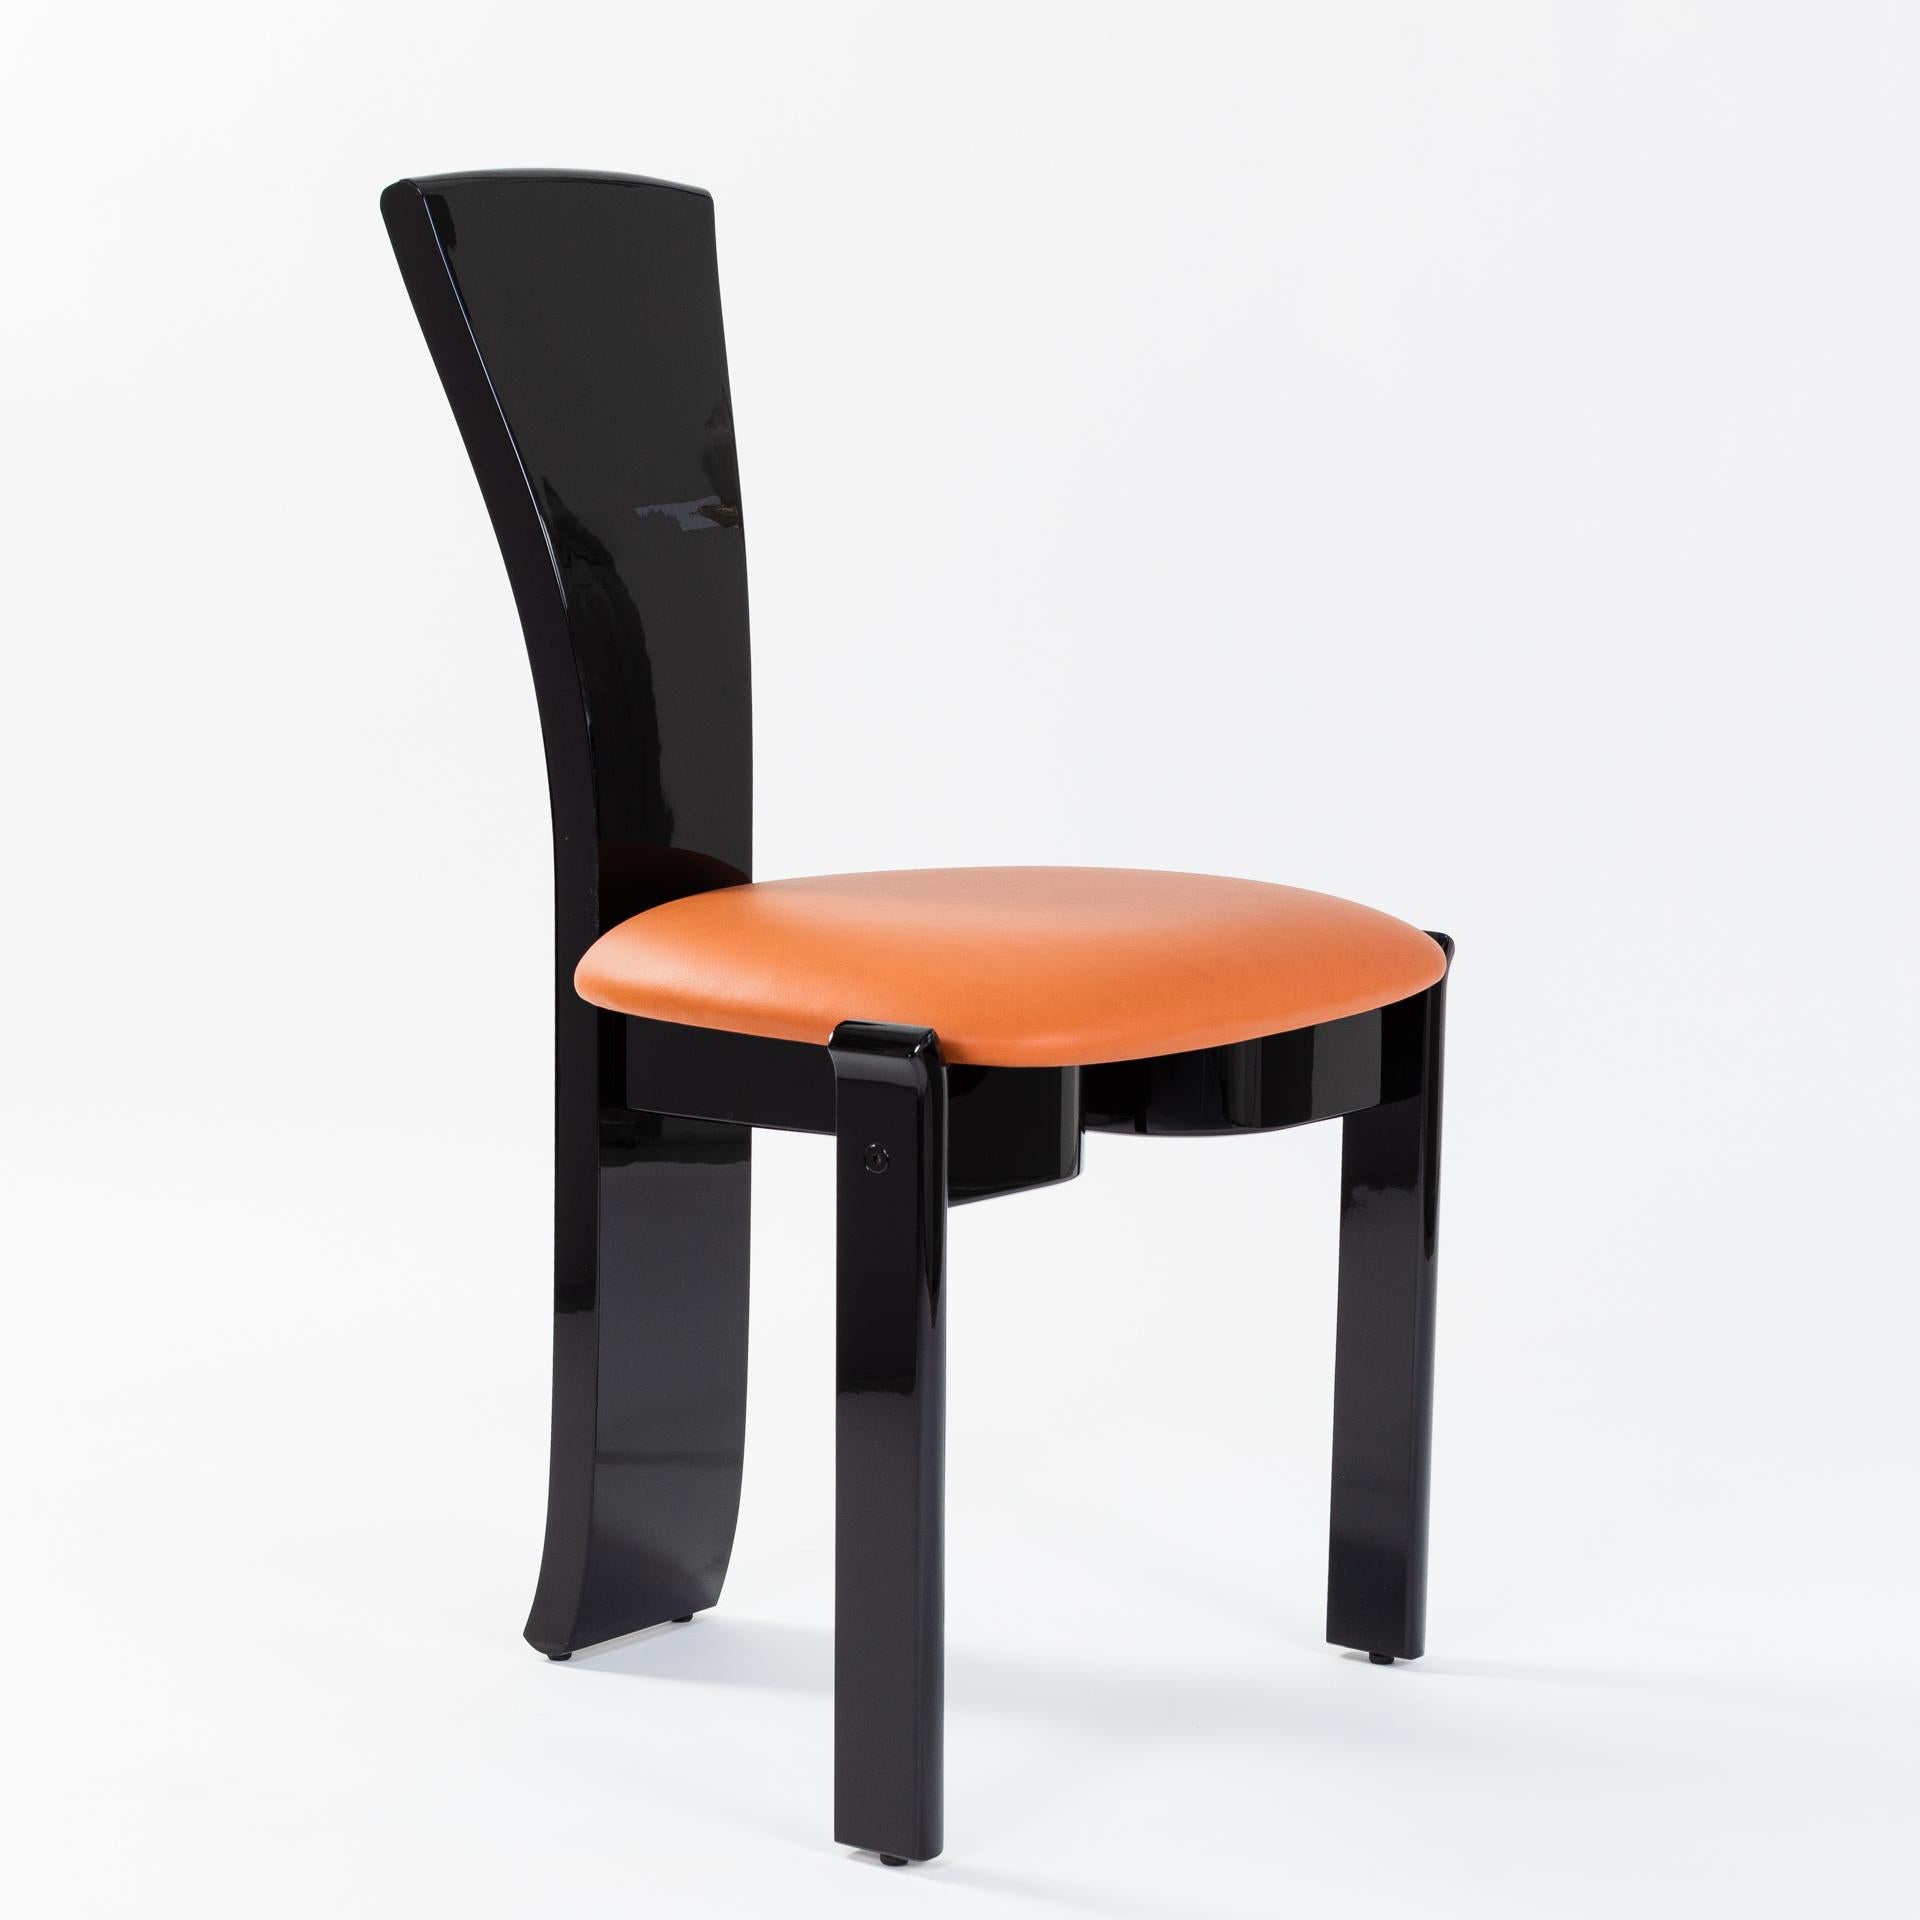 black lacquer dining chairs